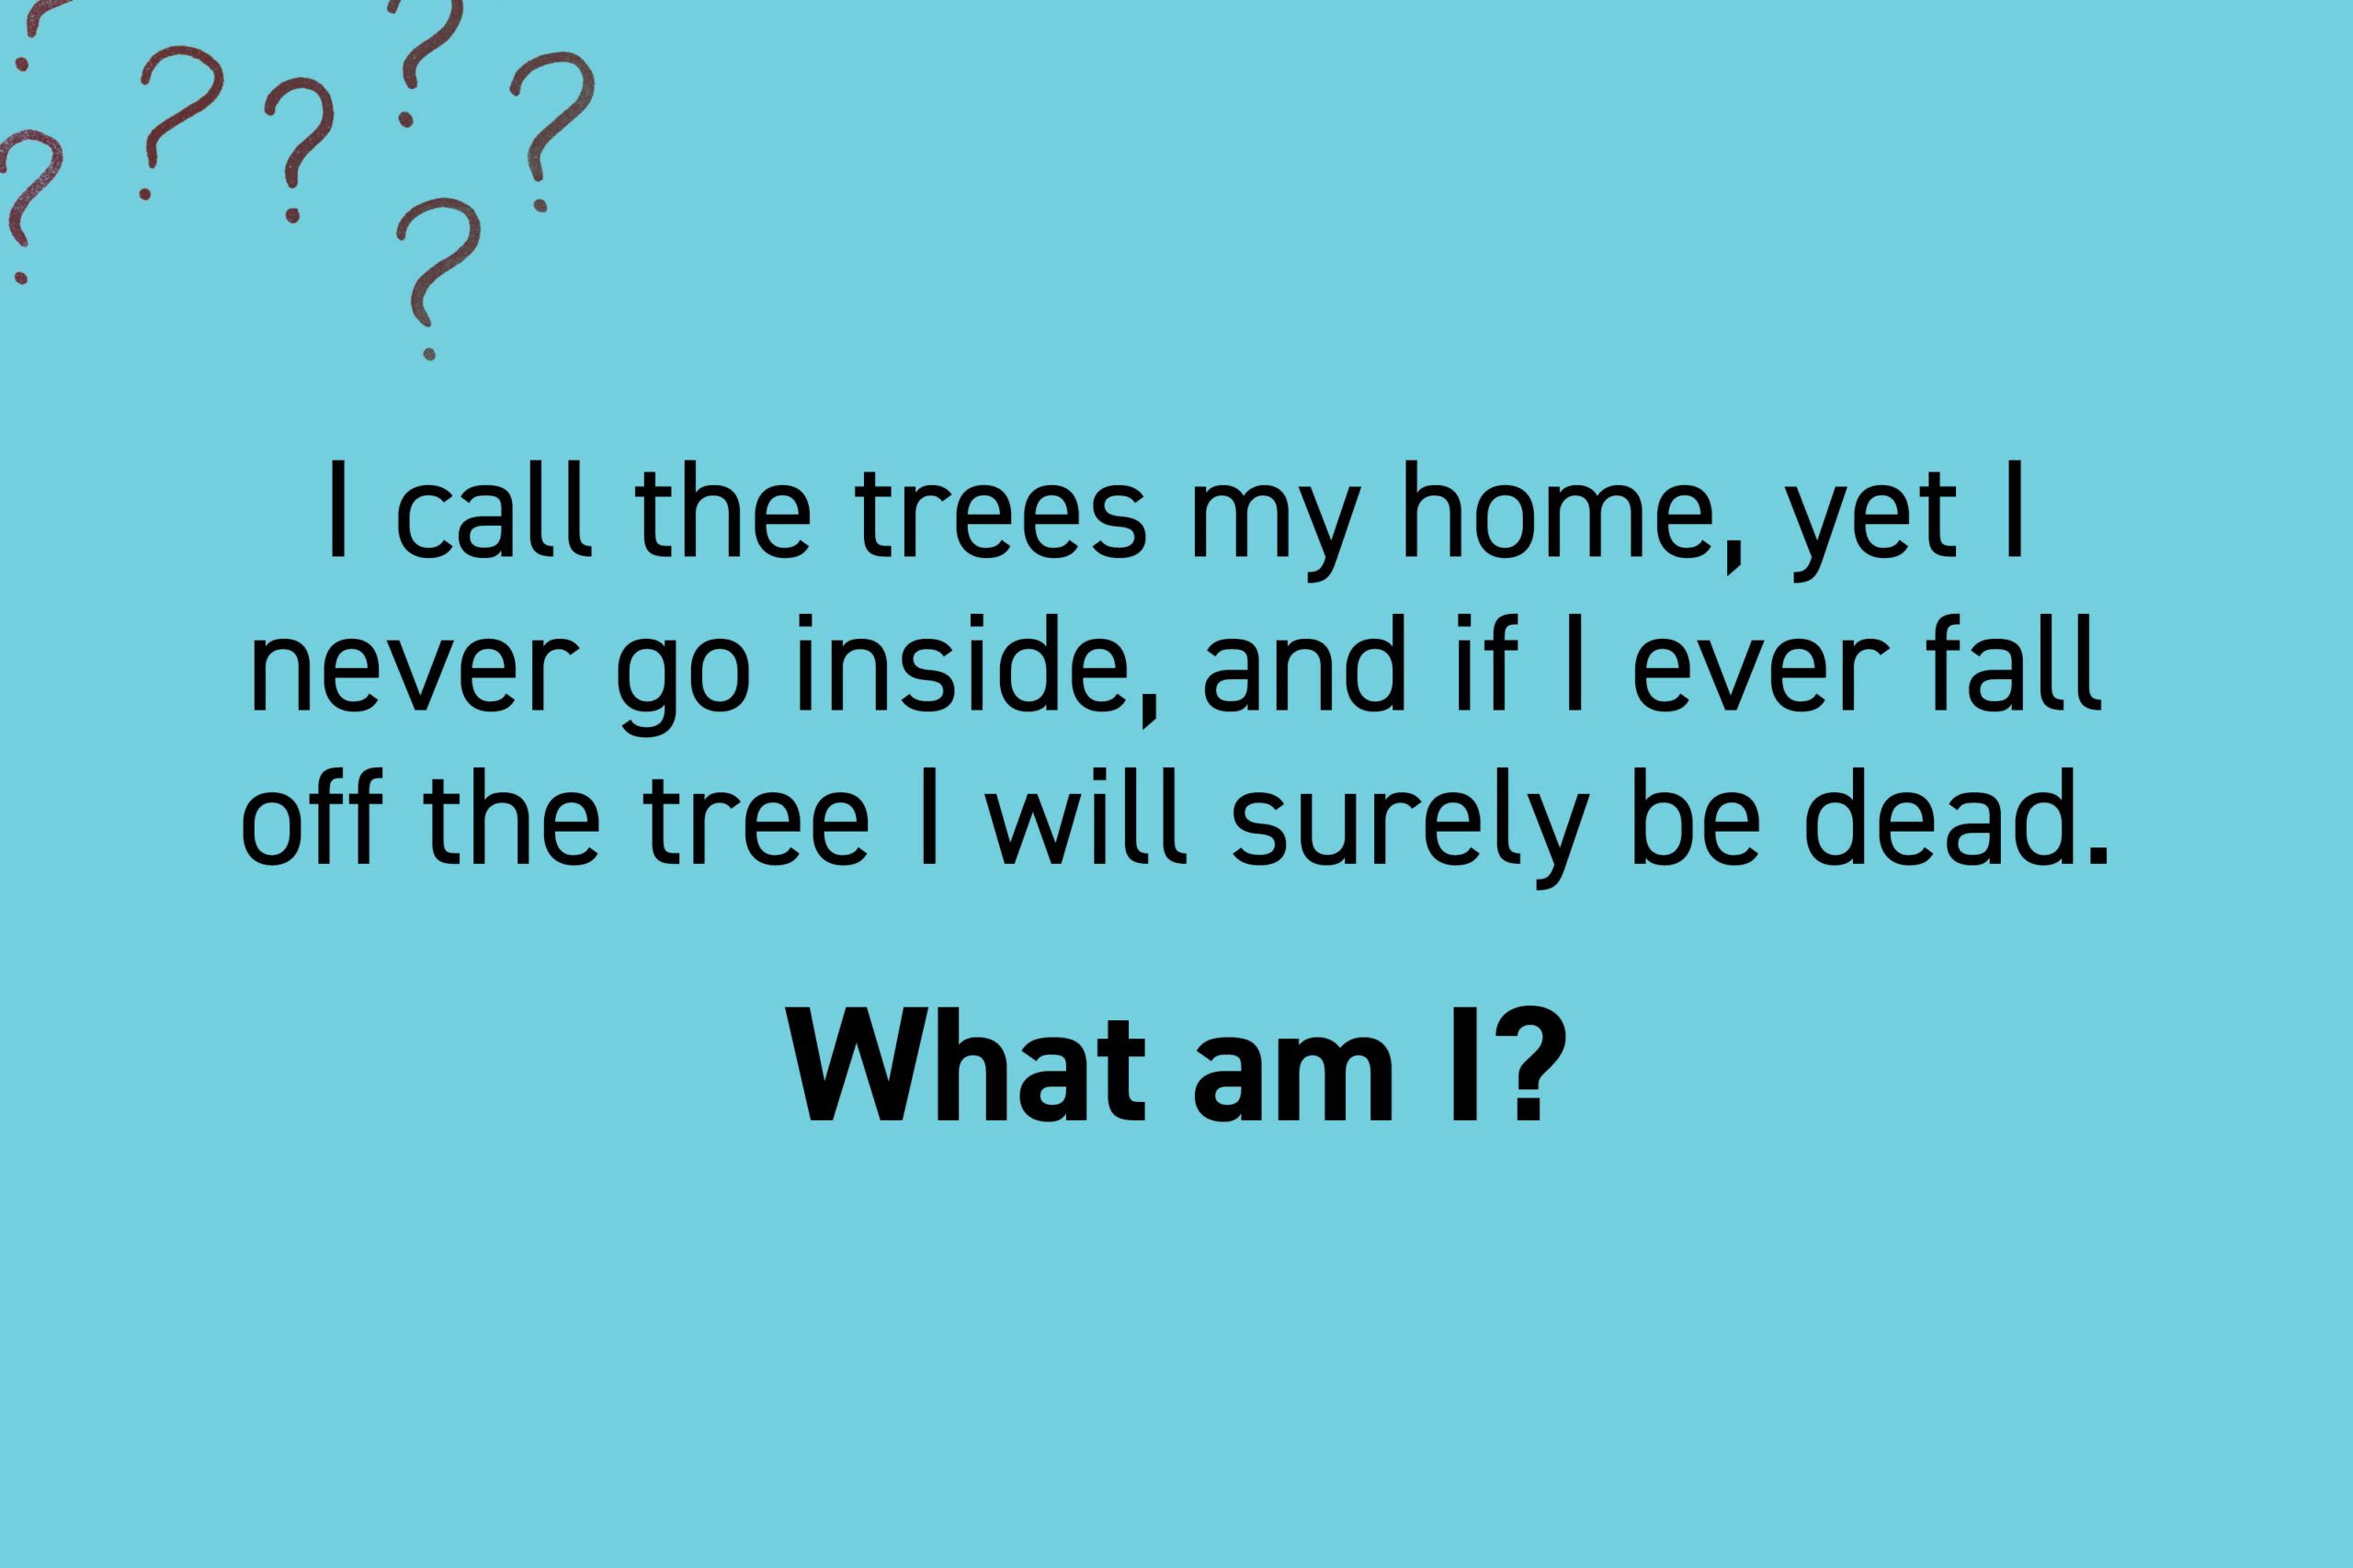 I call the trees my home, yet I never go inside, and if I ever fall off the tree I will surely be dead.